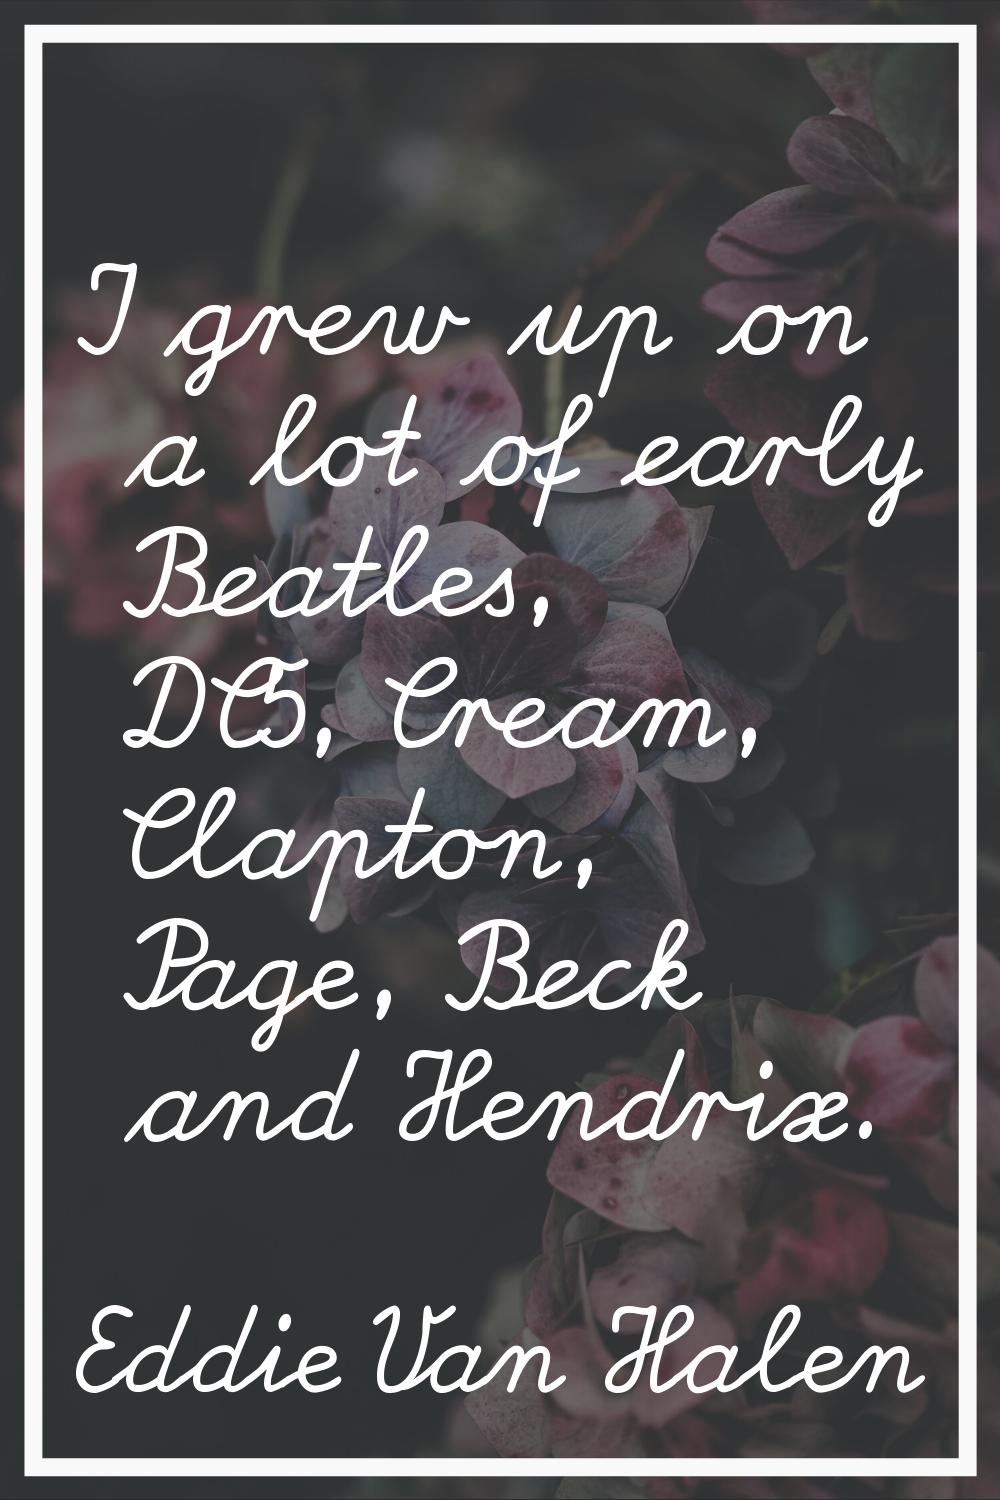 I grew up on a lot of early Beatles, DC5, Cream, Clapton, Page, Beck and Hendrix.